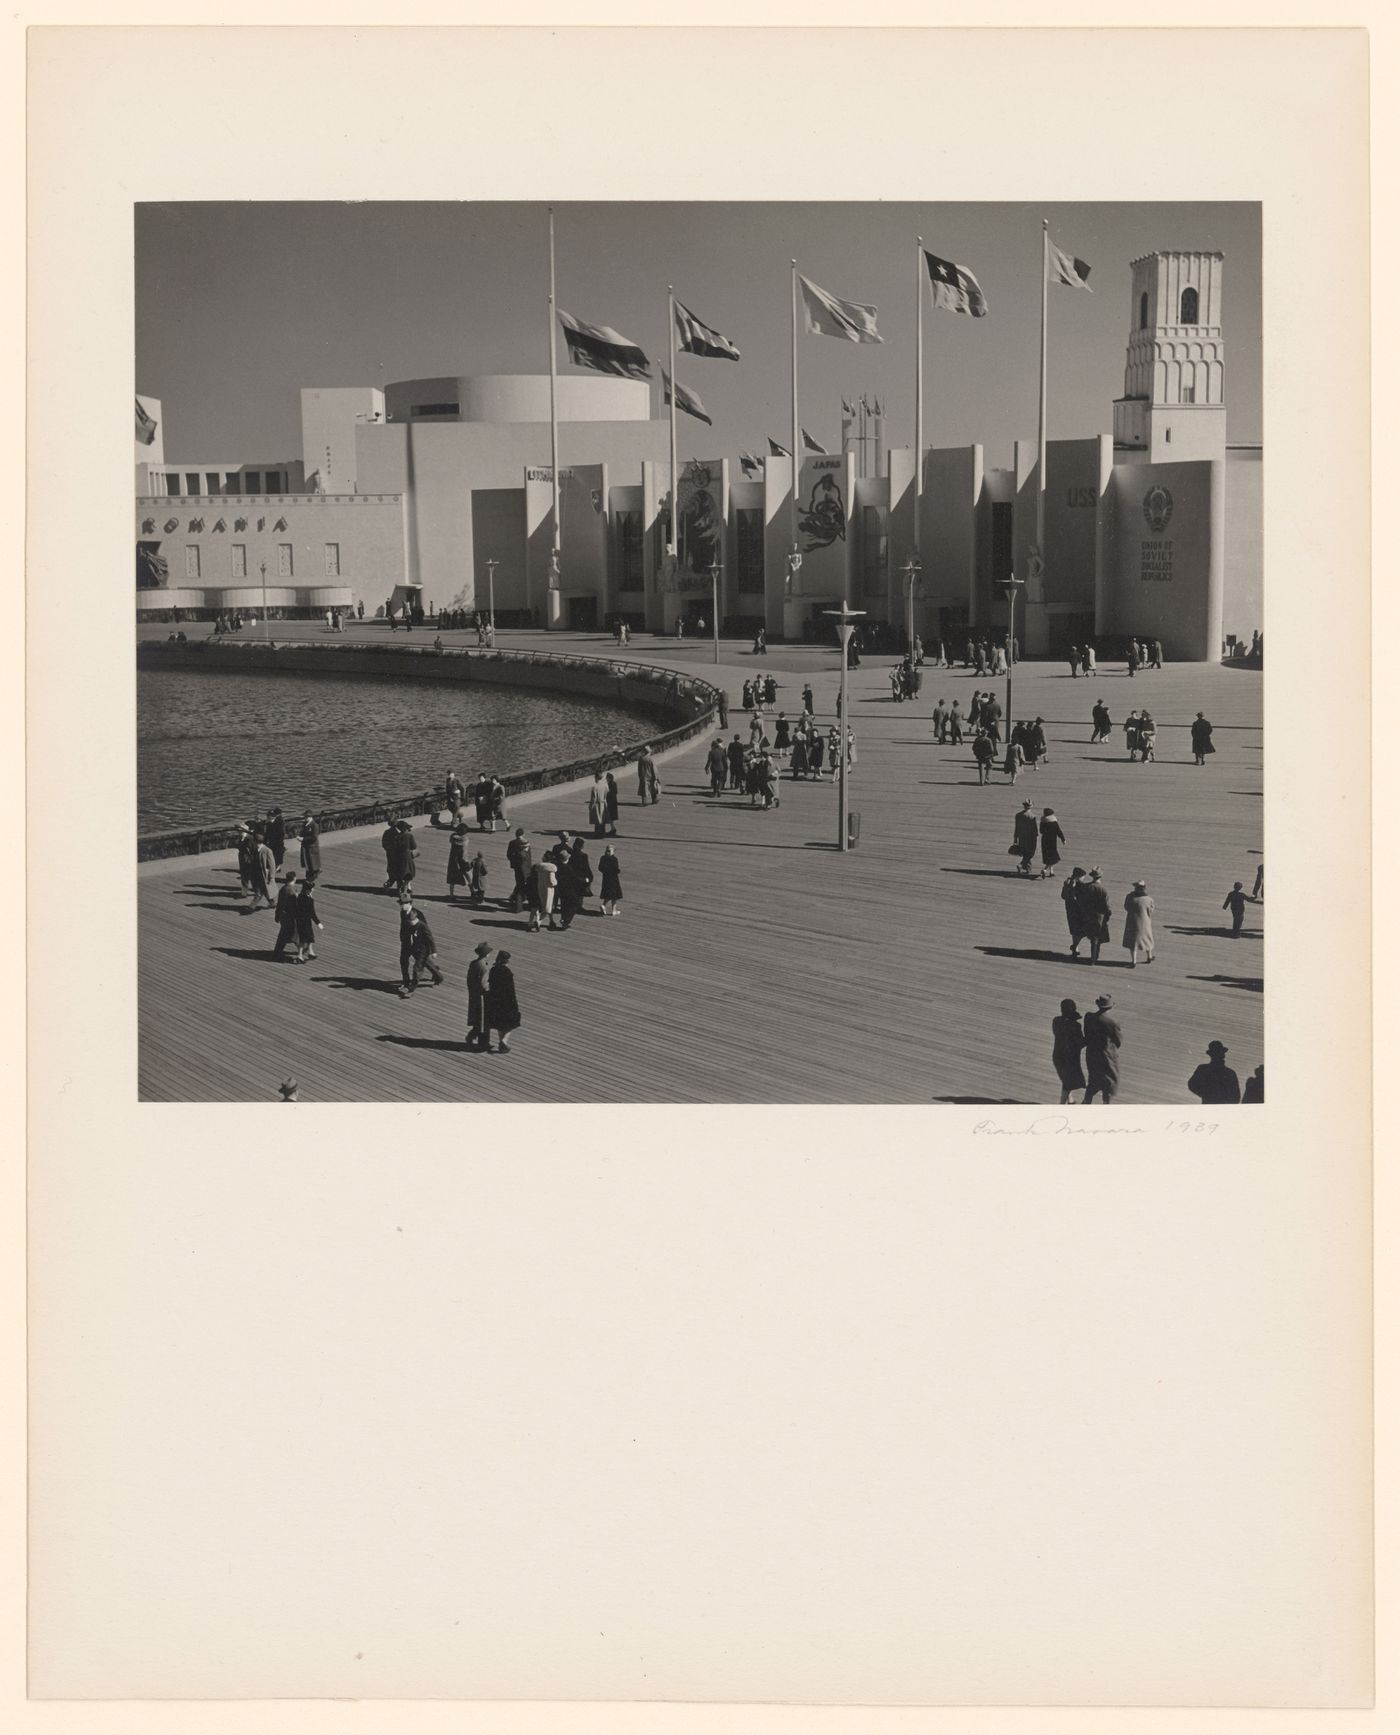 New York World's Fair (1939-1940): Crowds walking around Lagoon of Nations, Hall of Nations building group in background